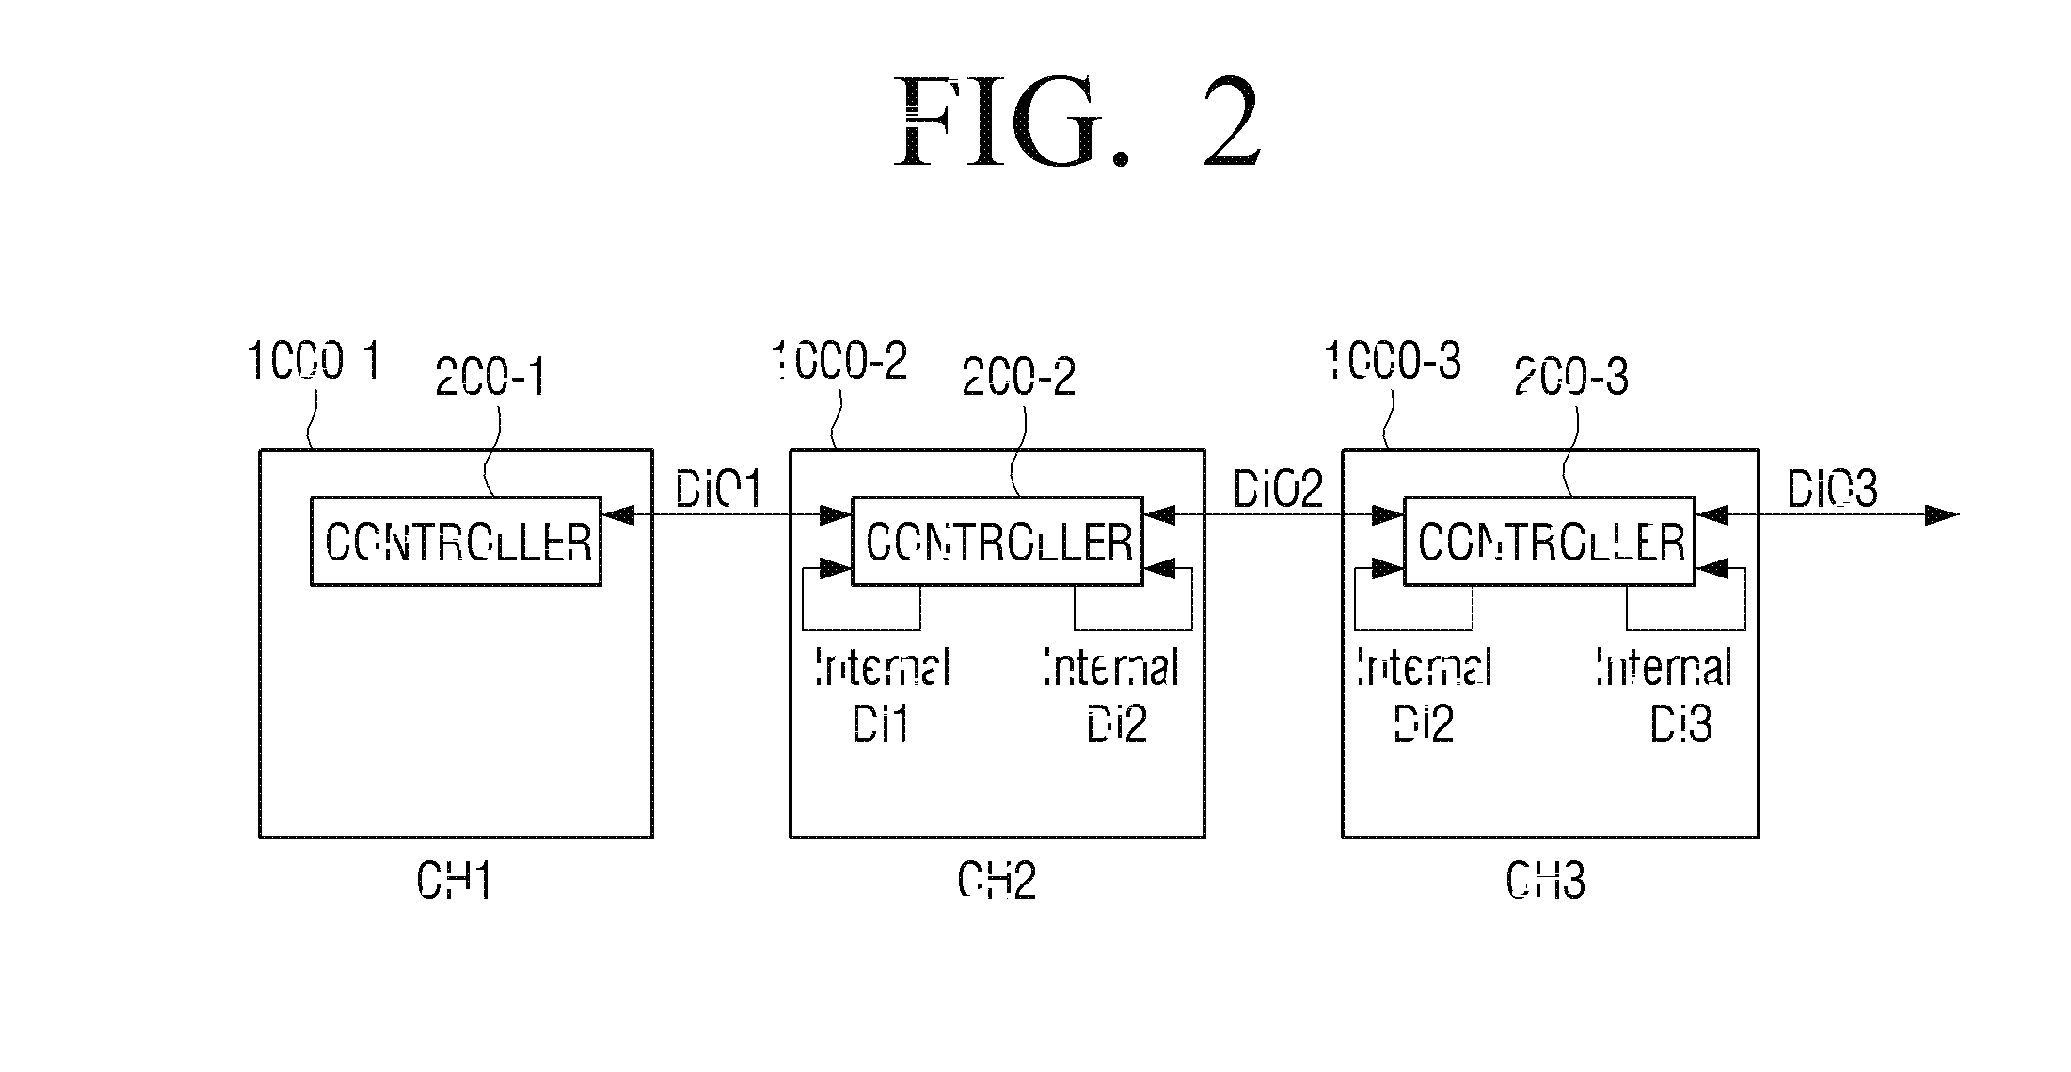 Source driver, controller, and method for driving source driver